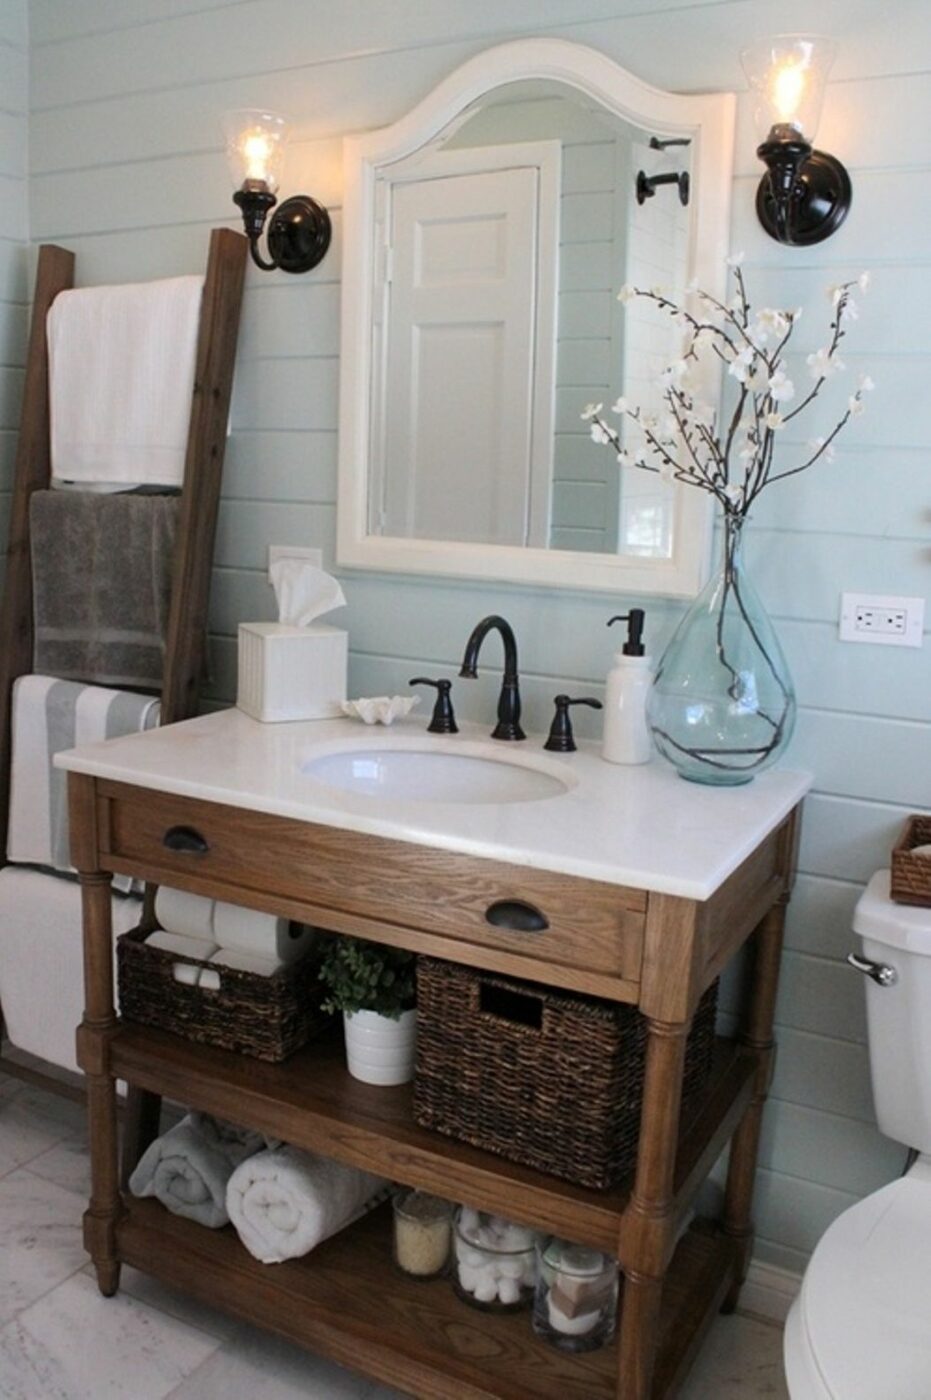 Cottage Bath with Painted Shiplap and Vintage Hardware